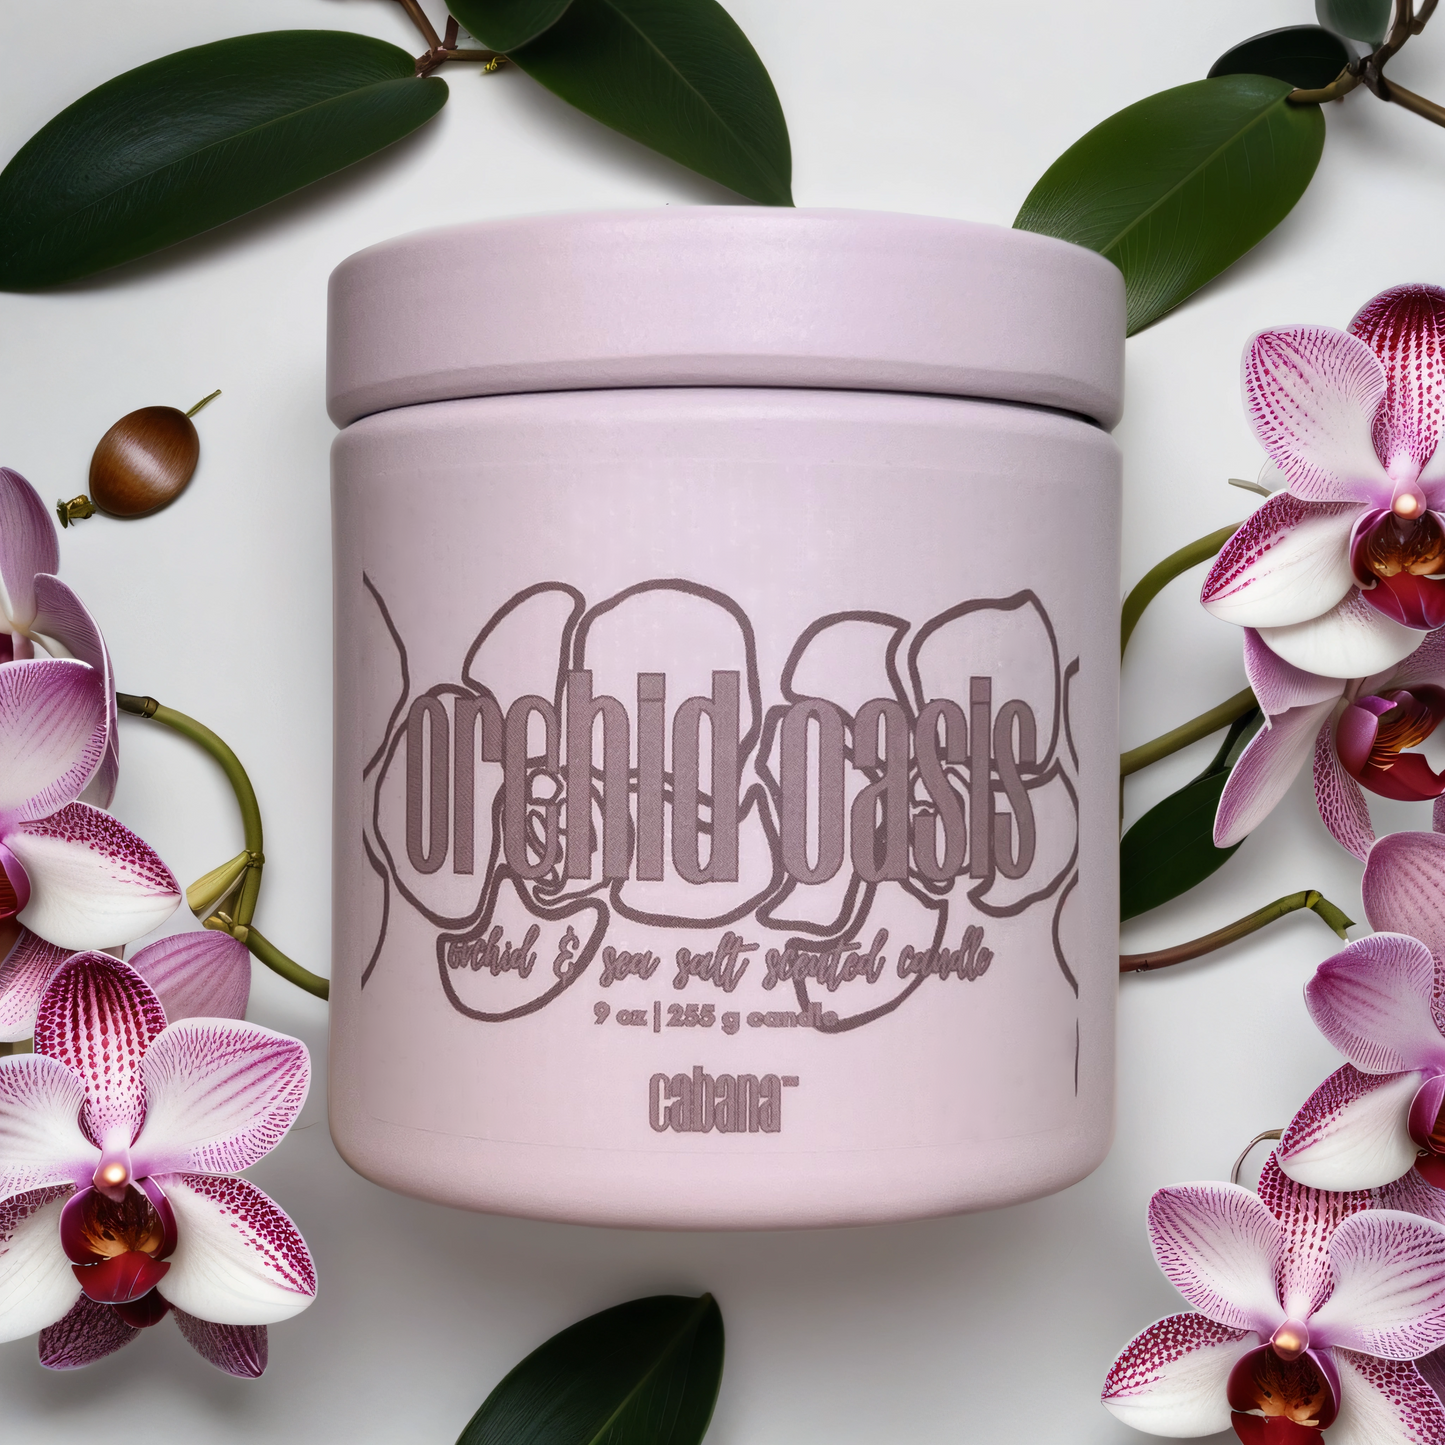 Orchid Oasis Candle